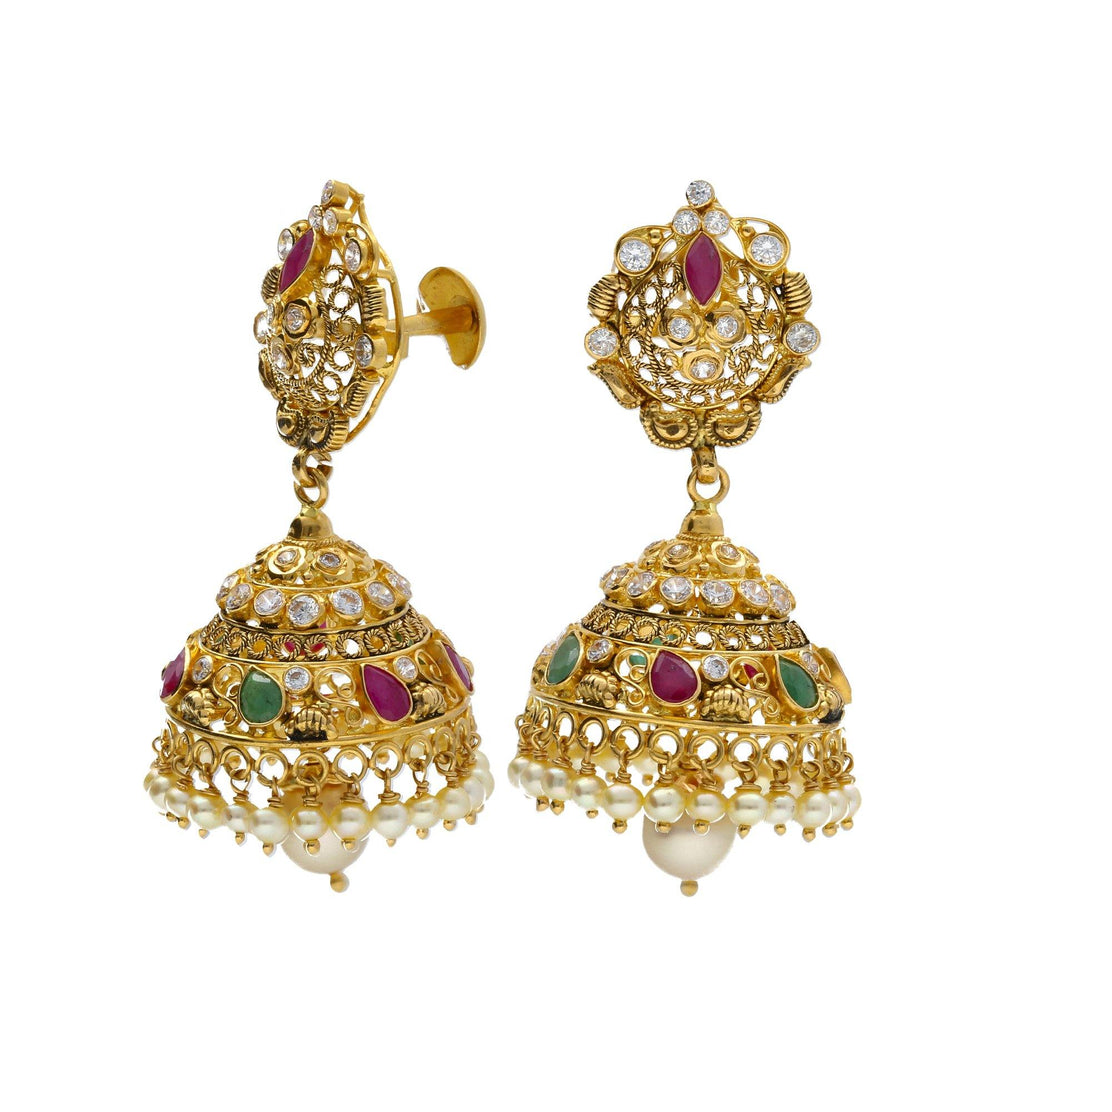 Pair of Indian, Enamelled Gold Earrings set with Large Golconda Diamonds,  Pearls & Emeralds on Michael Backman Ltd